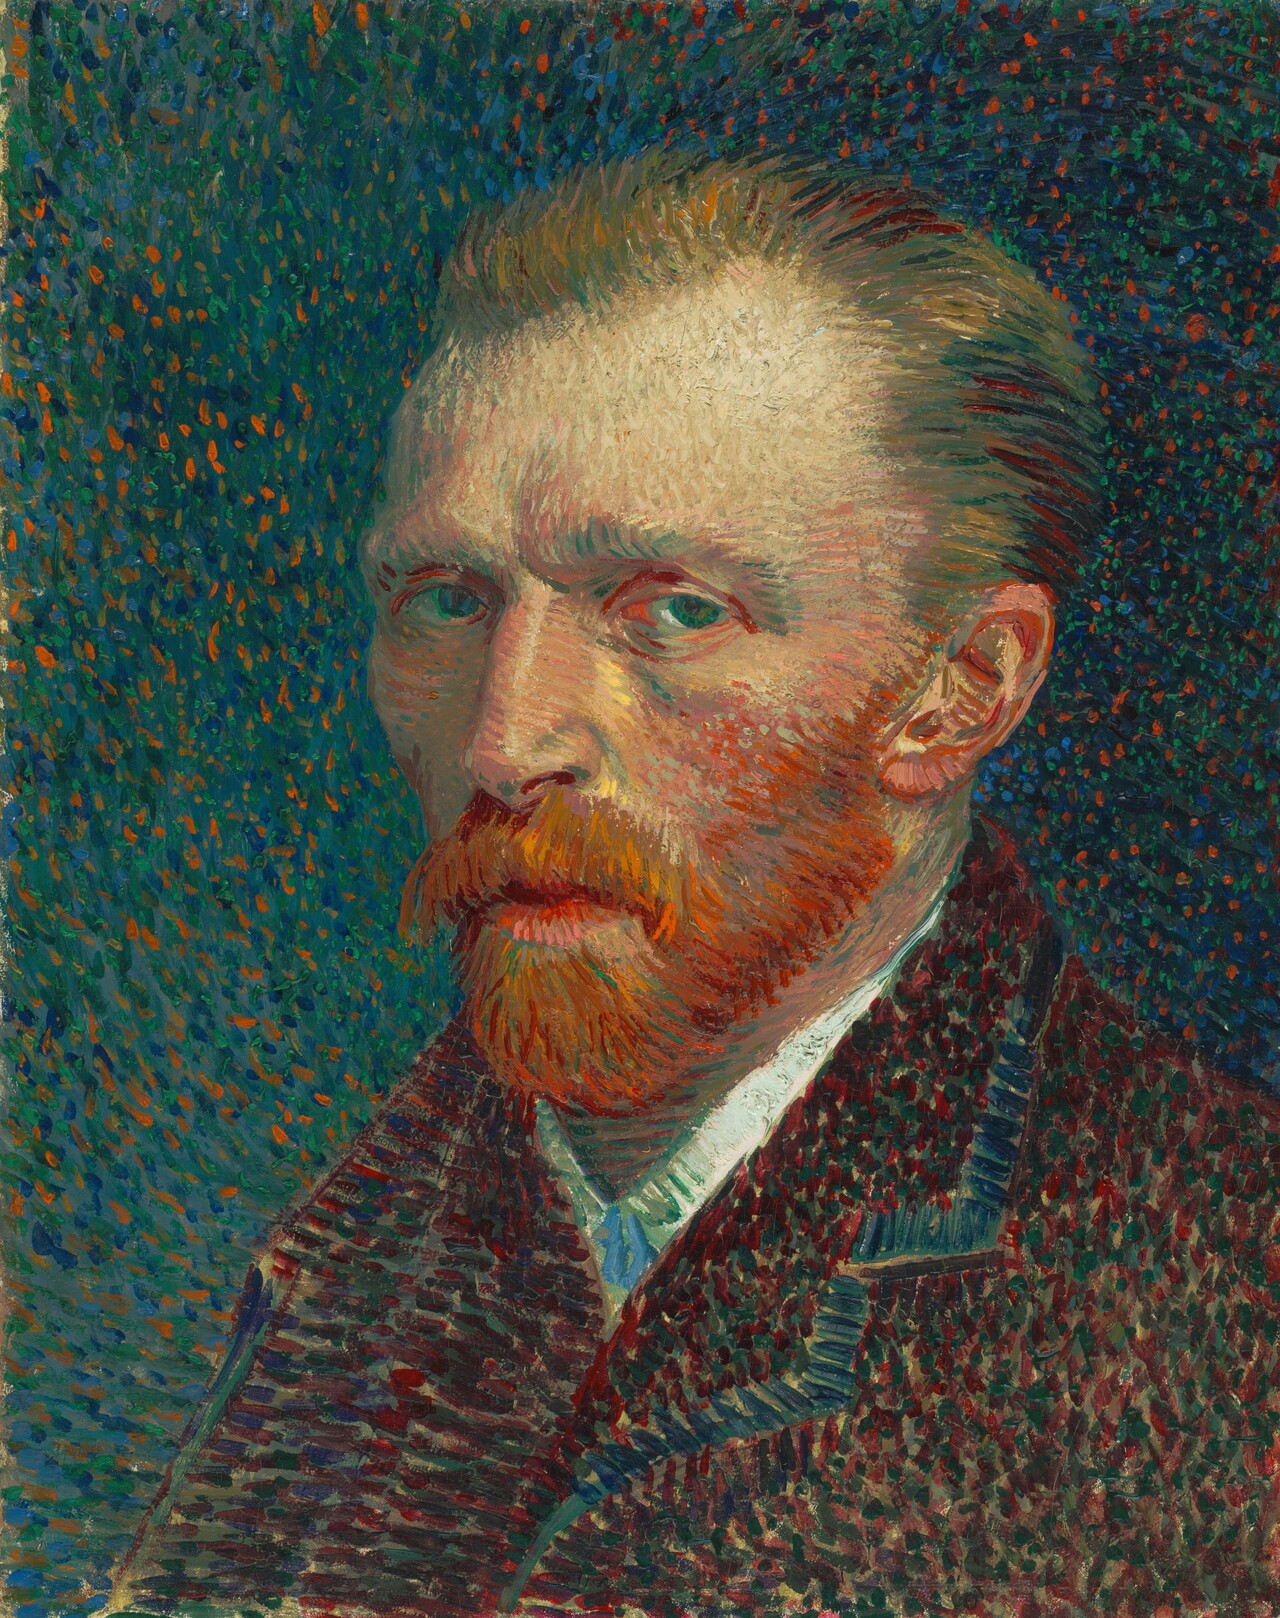 Van Gogh's self-portrait with vibrant brushstrokes and colorful background